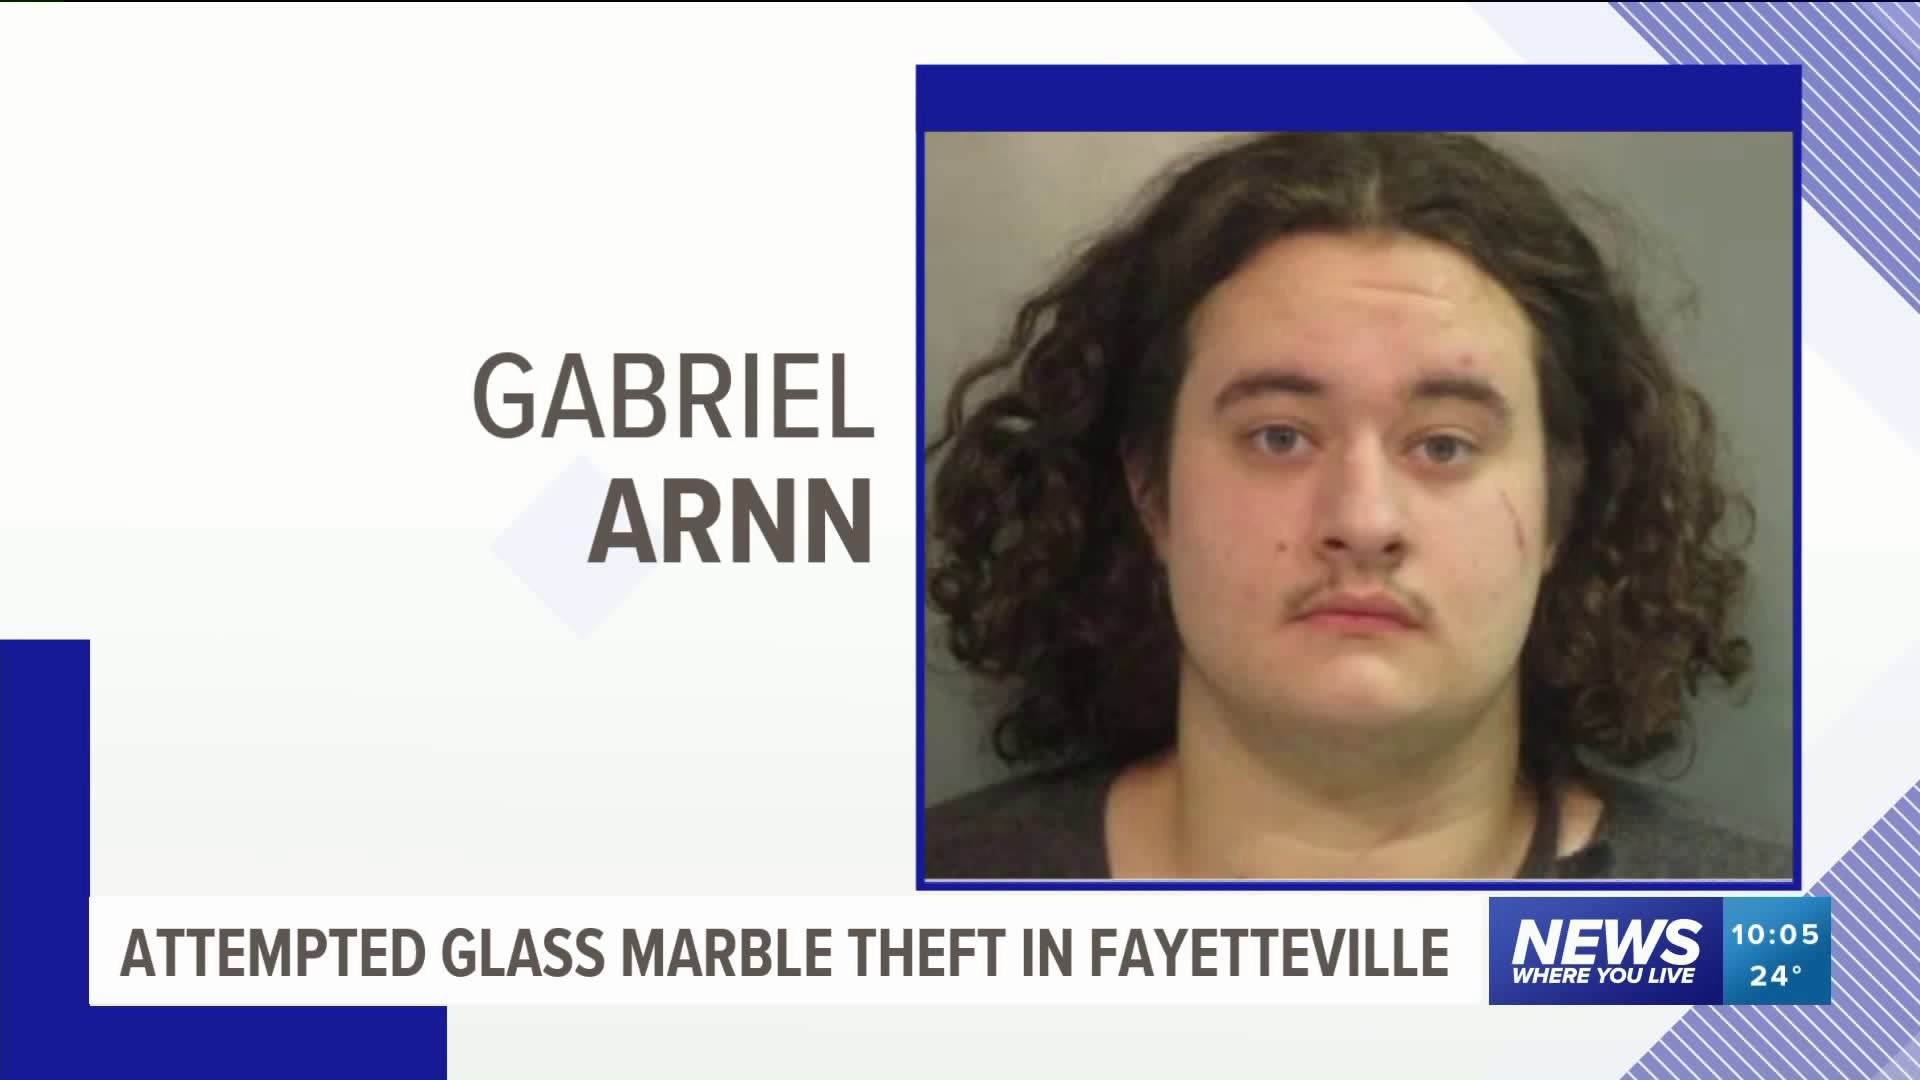 Fayetteville Man Facing Multiple Charges After Attempting To Steal Large Glass Marble